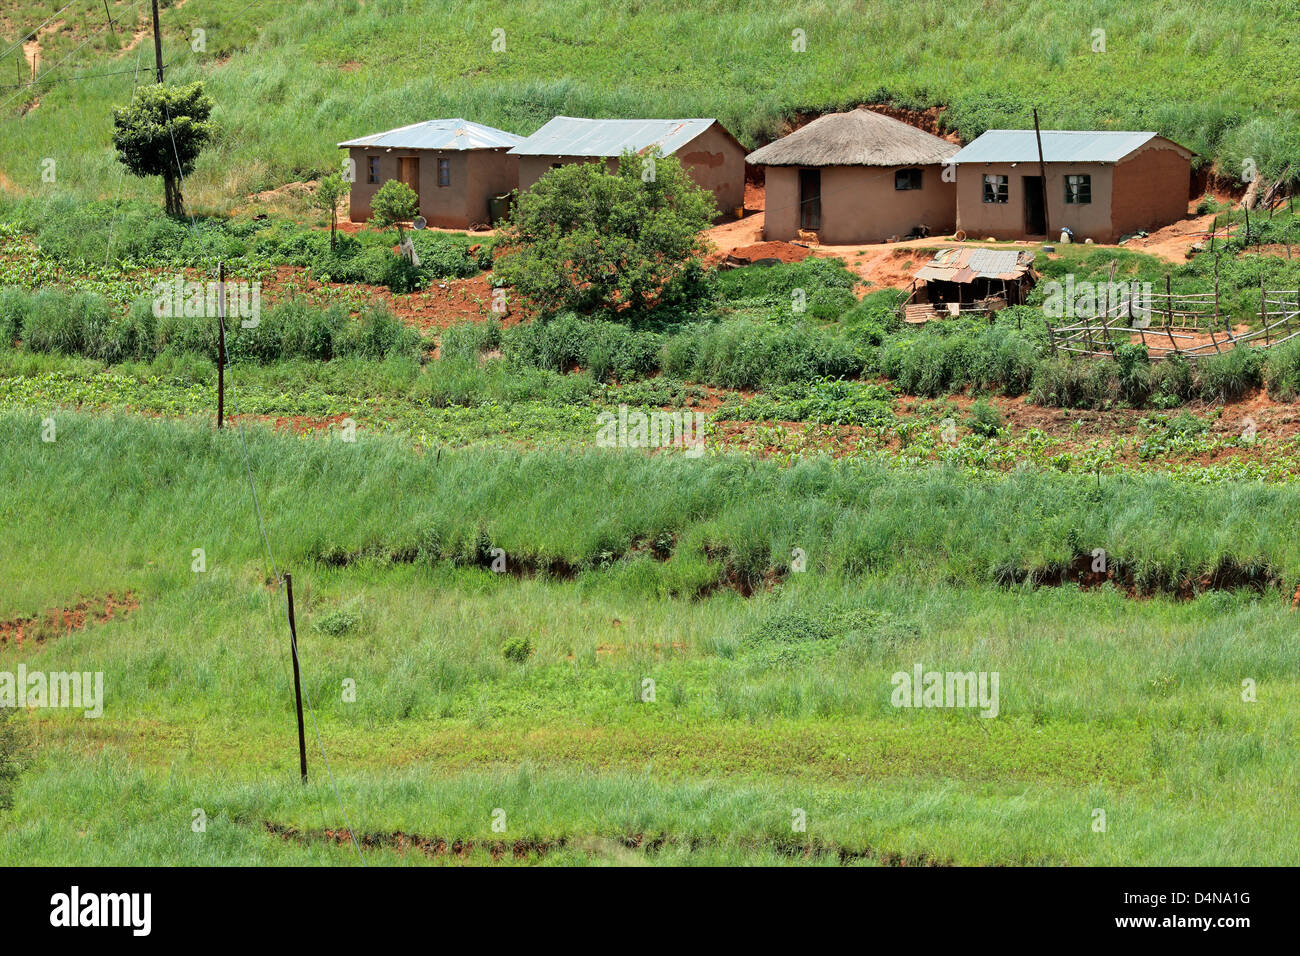 Small rural huts with cultivated lands, KwaZulu-Natal, South Africa Stock Photo